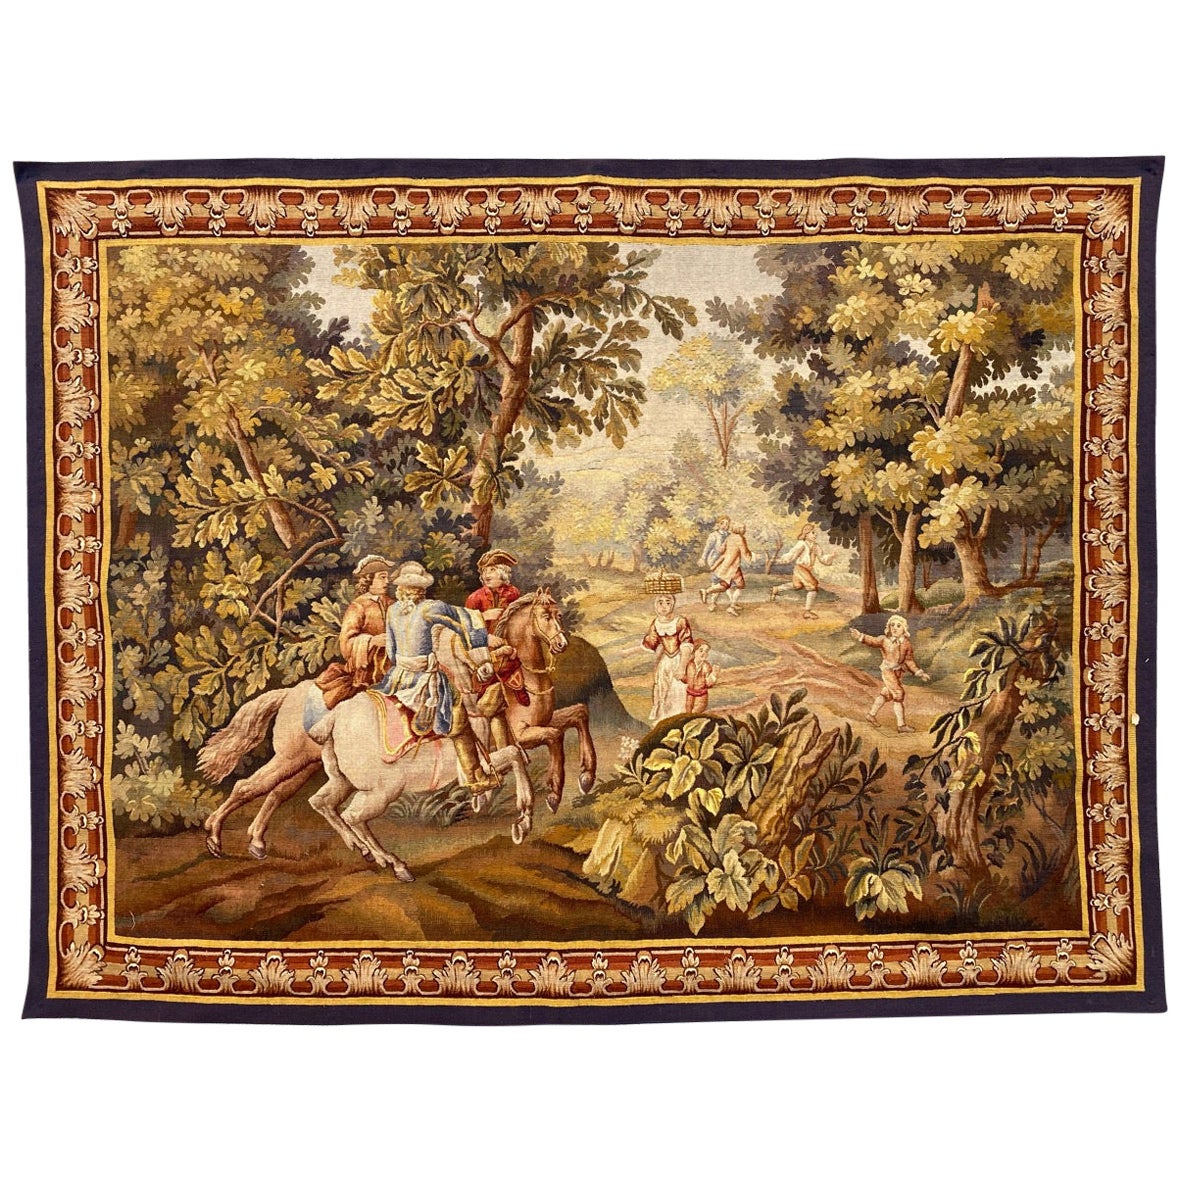 Wonderful Fine Antique French Aubusson Tapestry